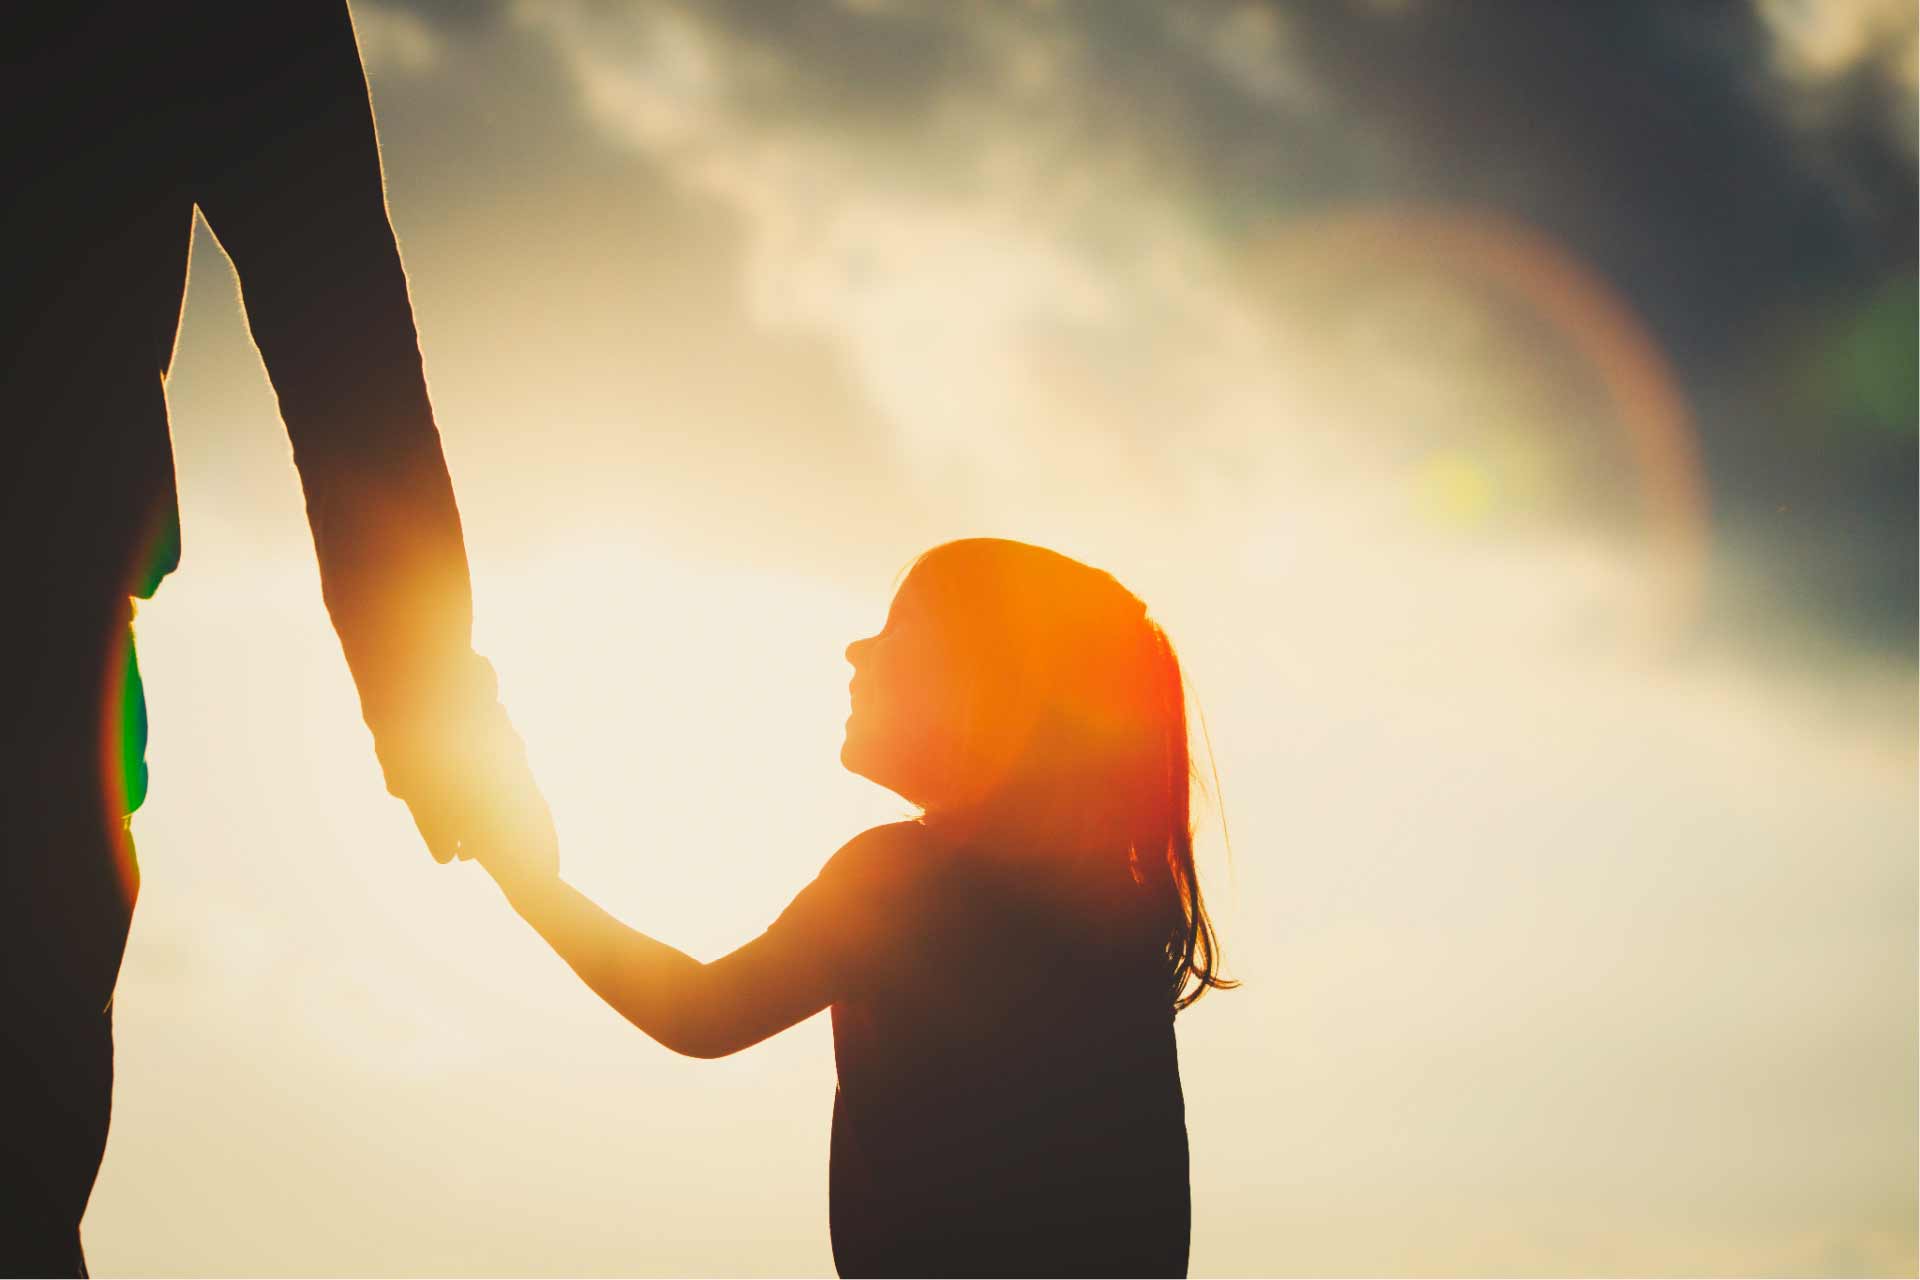 Silhouette of young girl and caregiver holding hands with sun shining in background.